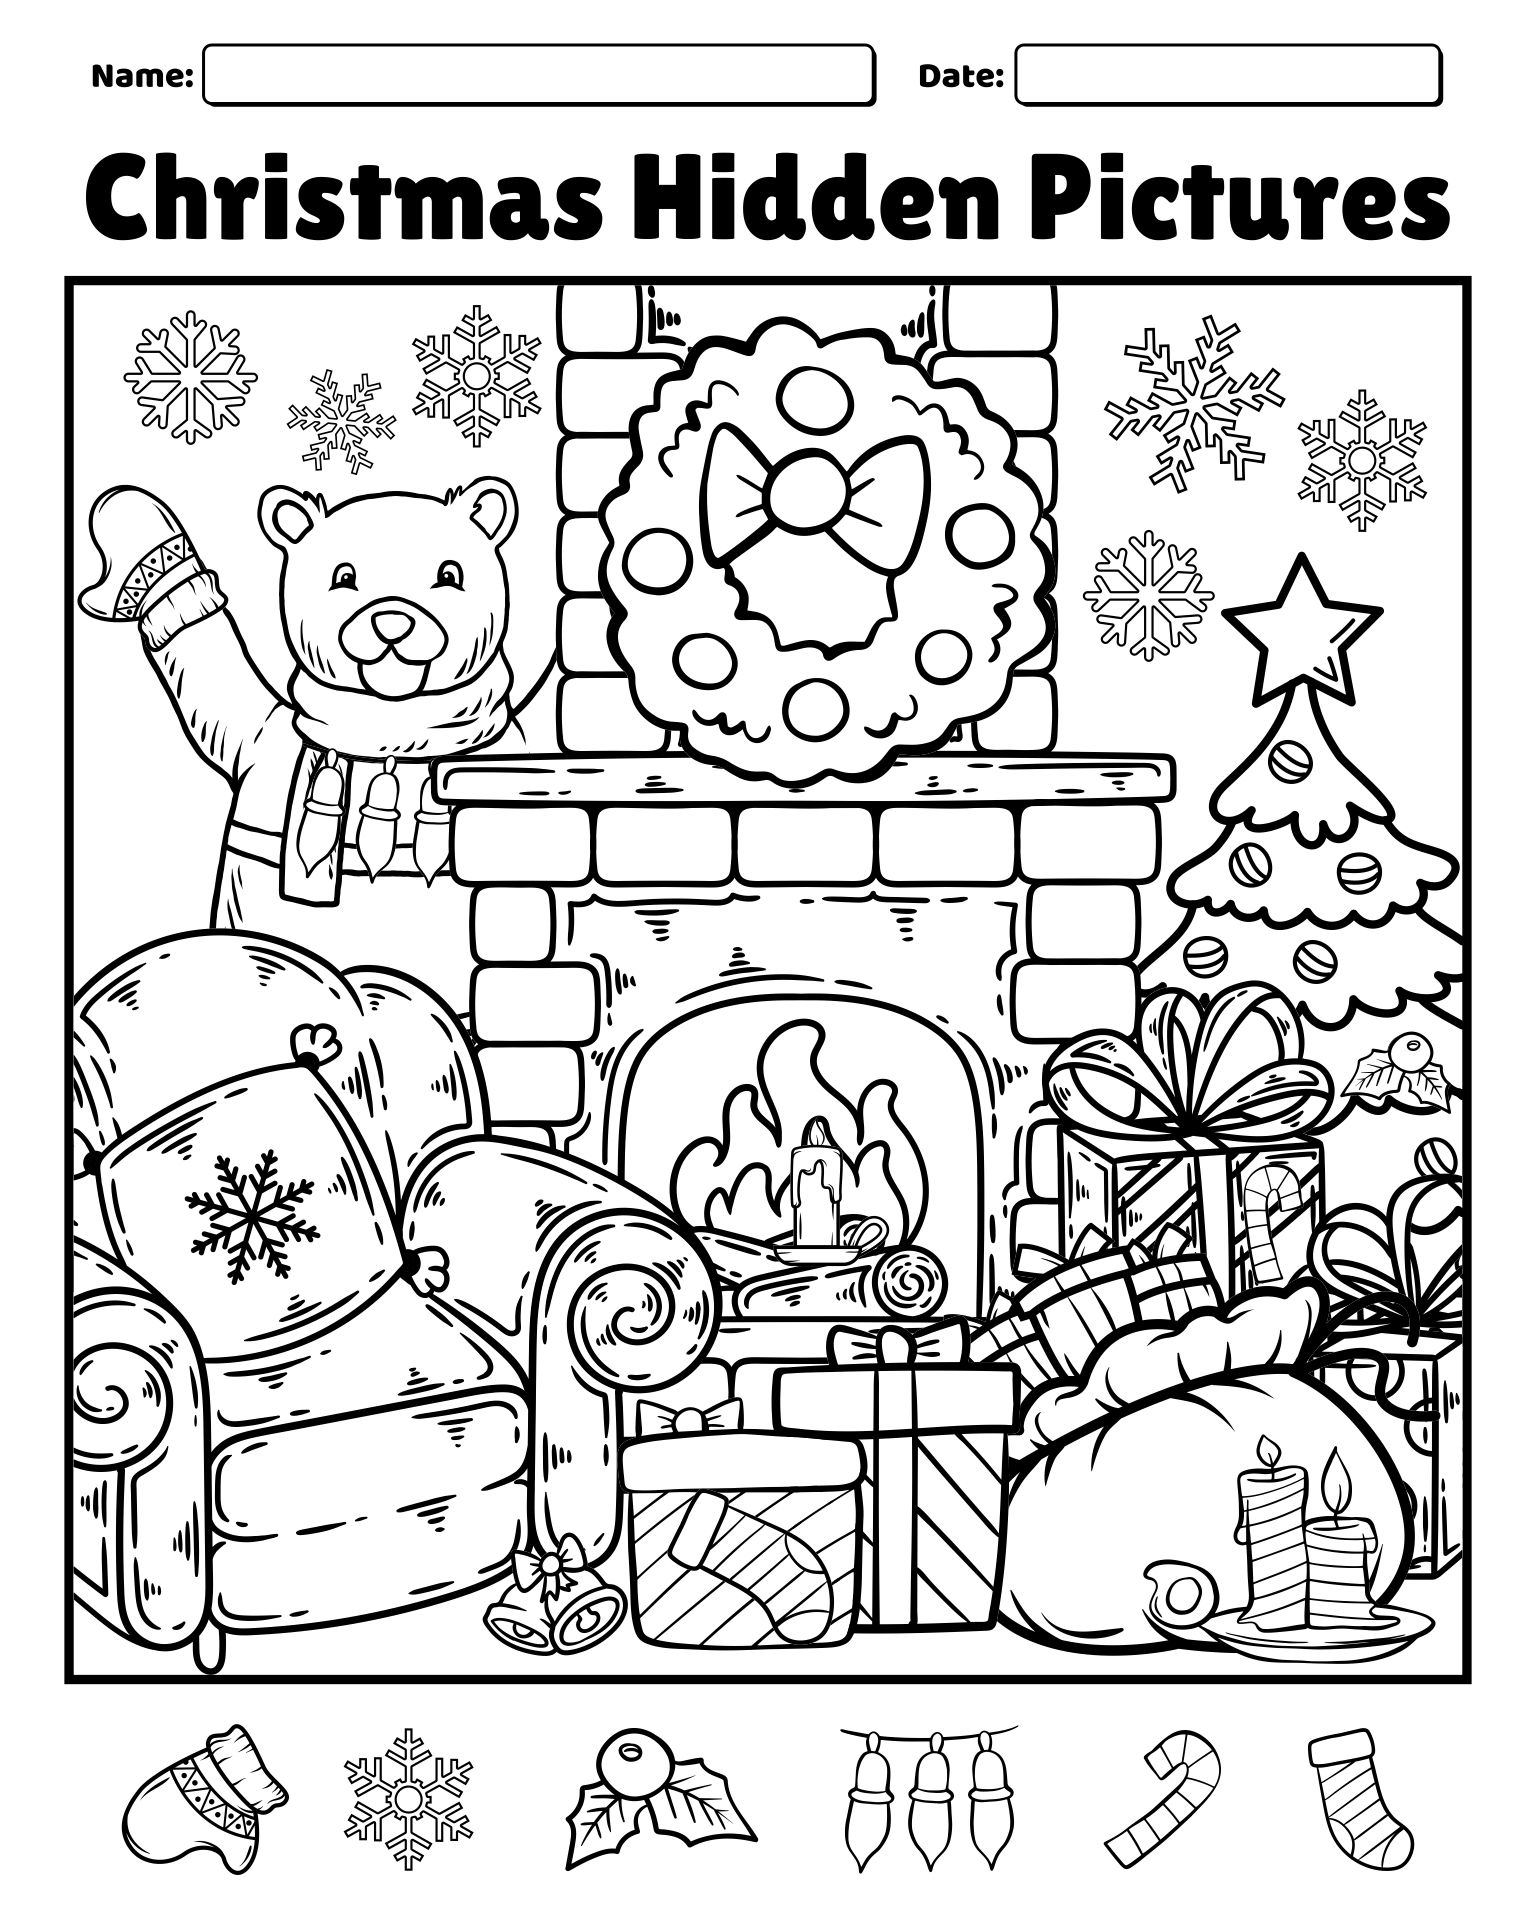 Find Hidden Objects Puzzles - 6 Free PDF Printables | Printablee